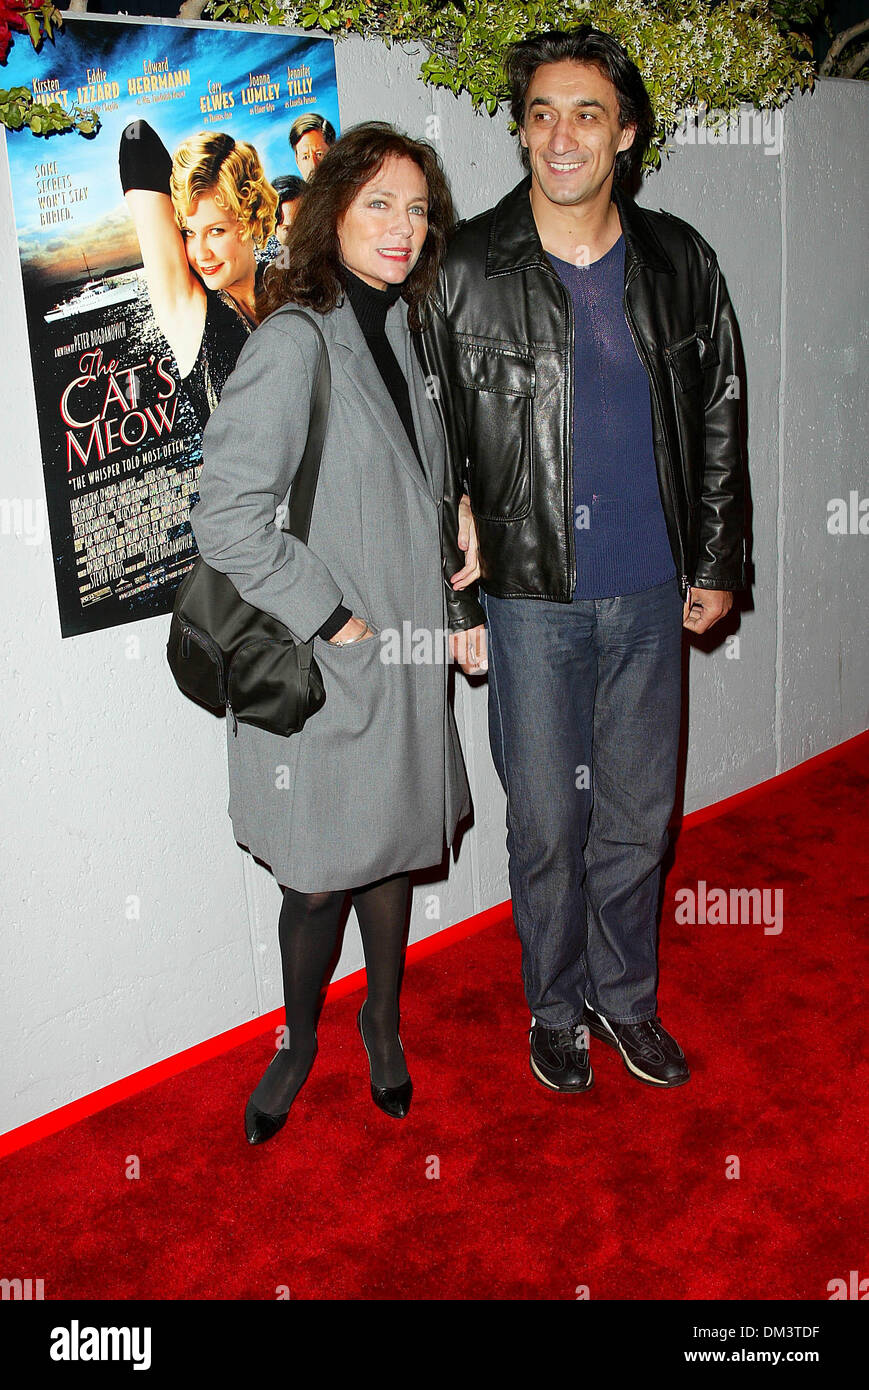 Apr. 10, 2002 - Los Angeles, CALIFORNIA - THE CAT'S MEOW.PREMIERE AT HARMONY GOLD THEATER IN LOS ANGELES, CA.JACQUELINE BISSET AND EMIN BOZTEPE. FITZROY BARRETT /    4-10-2002        K24644FB         (D)(Credit Image: © Globe Photos/ZUMAPRESS.com) Stock Photo